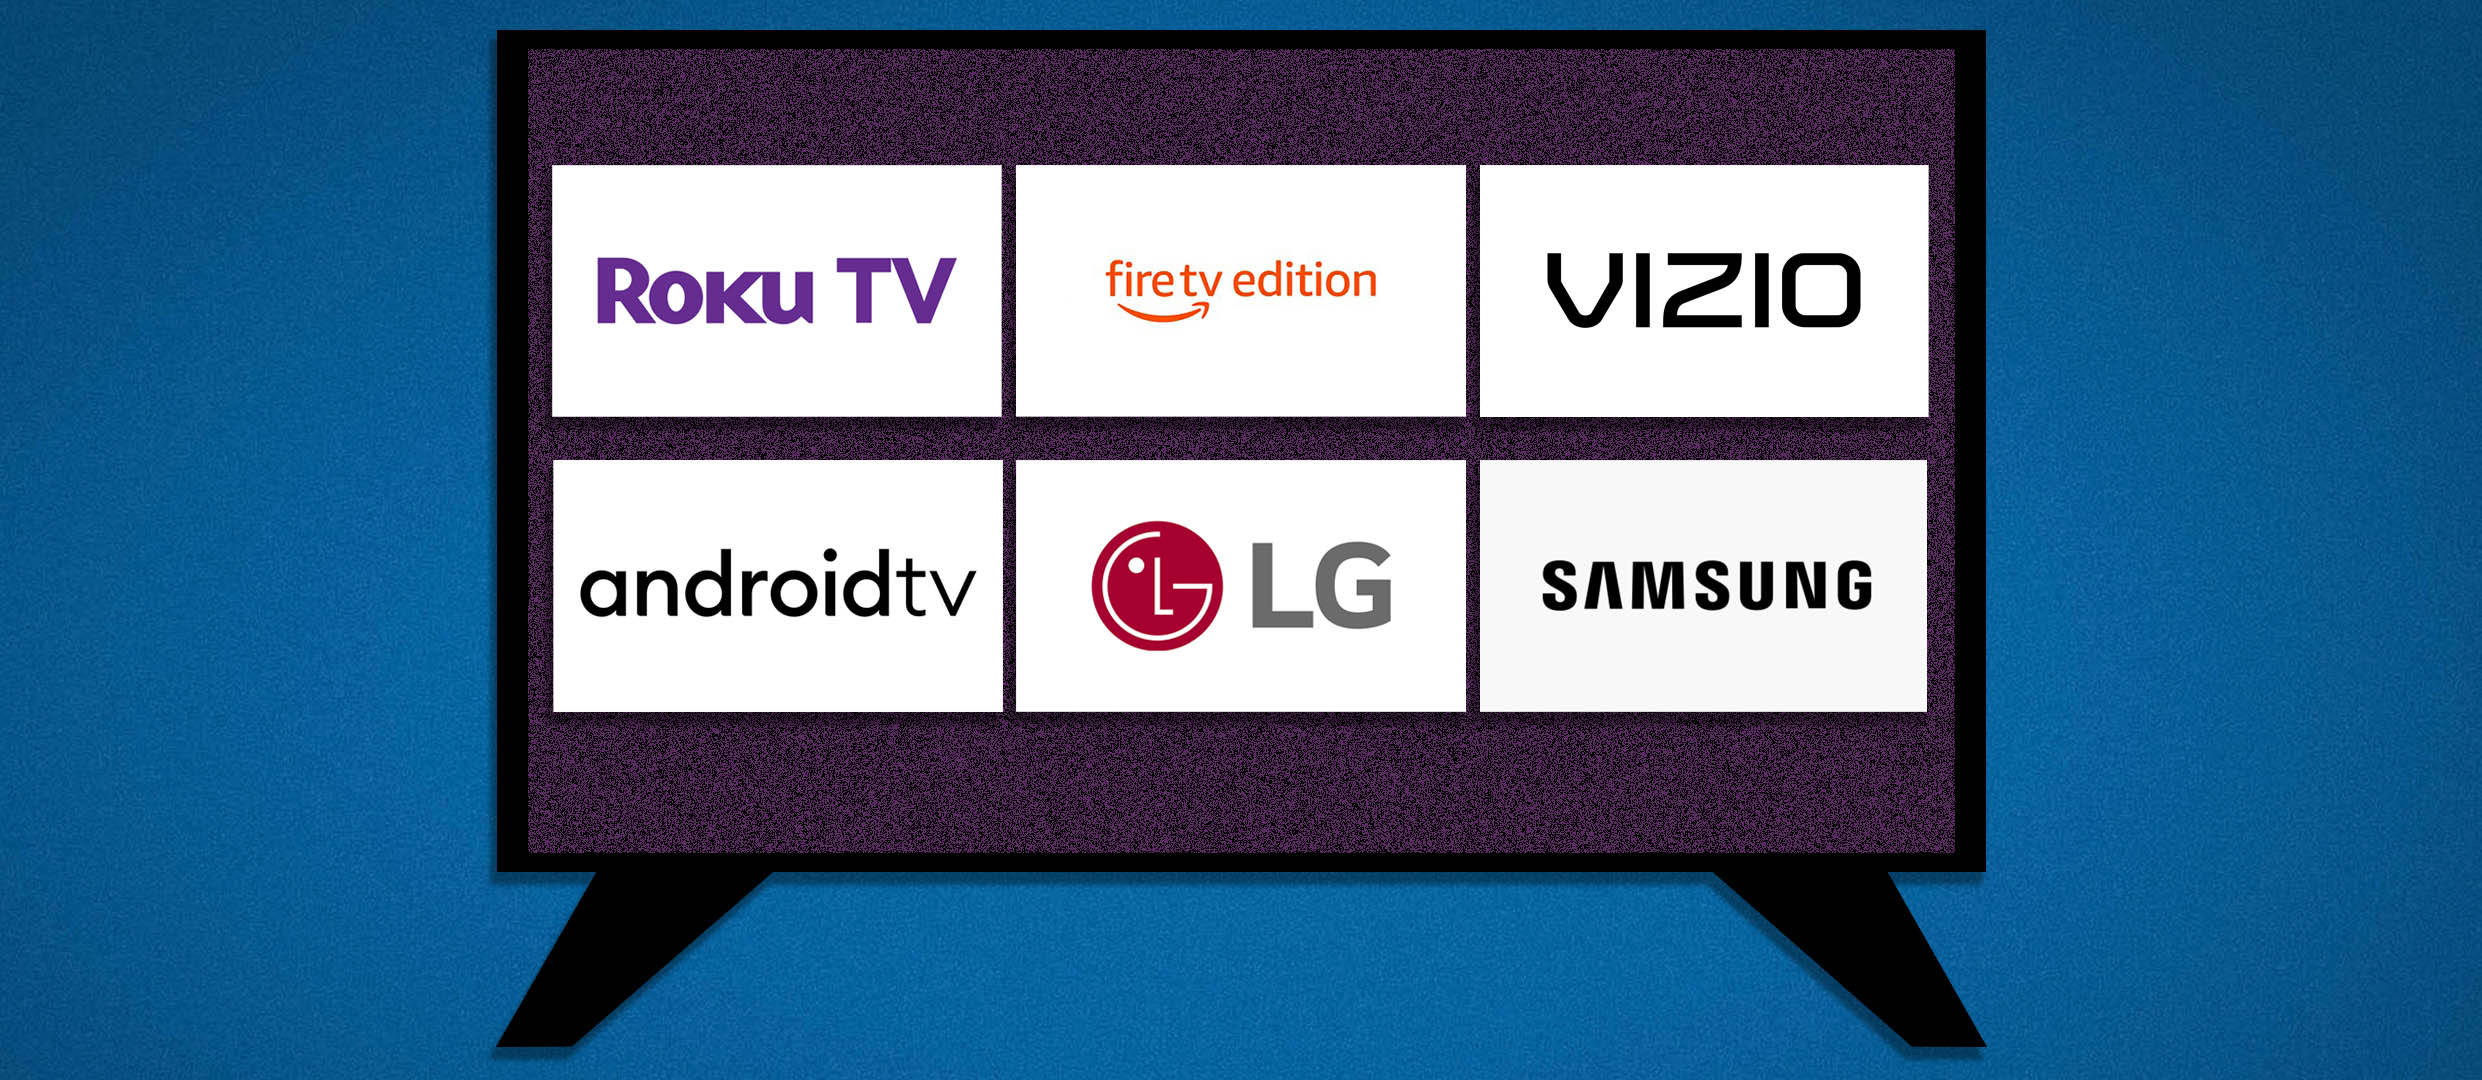 A graphic of a TV displaying serveral smart TV logos